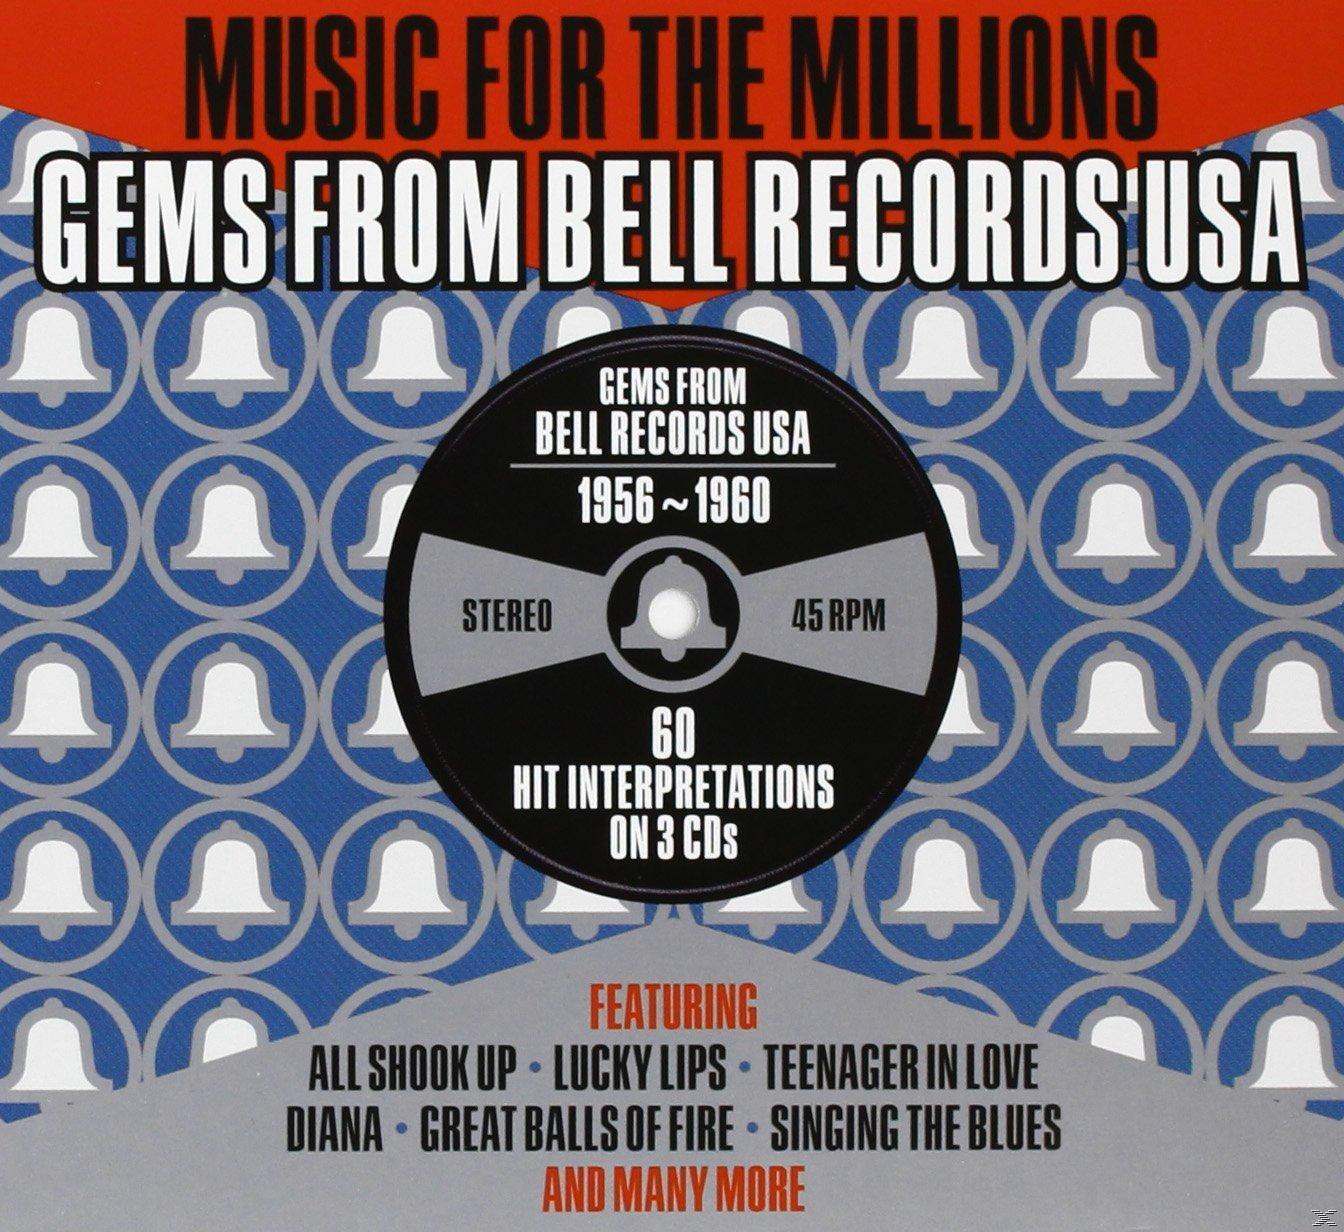 Story VARIOUS The - Music Rec.Usa For (CD) Millions-Bell 1956-60 -